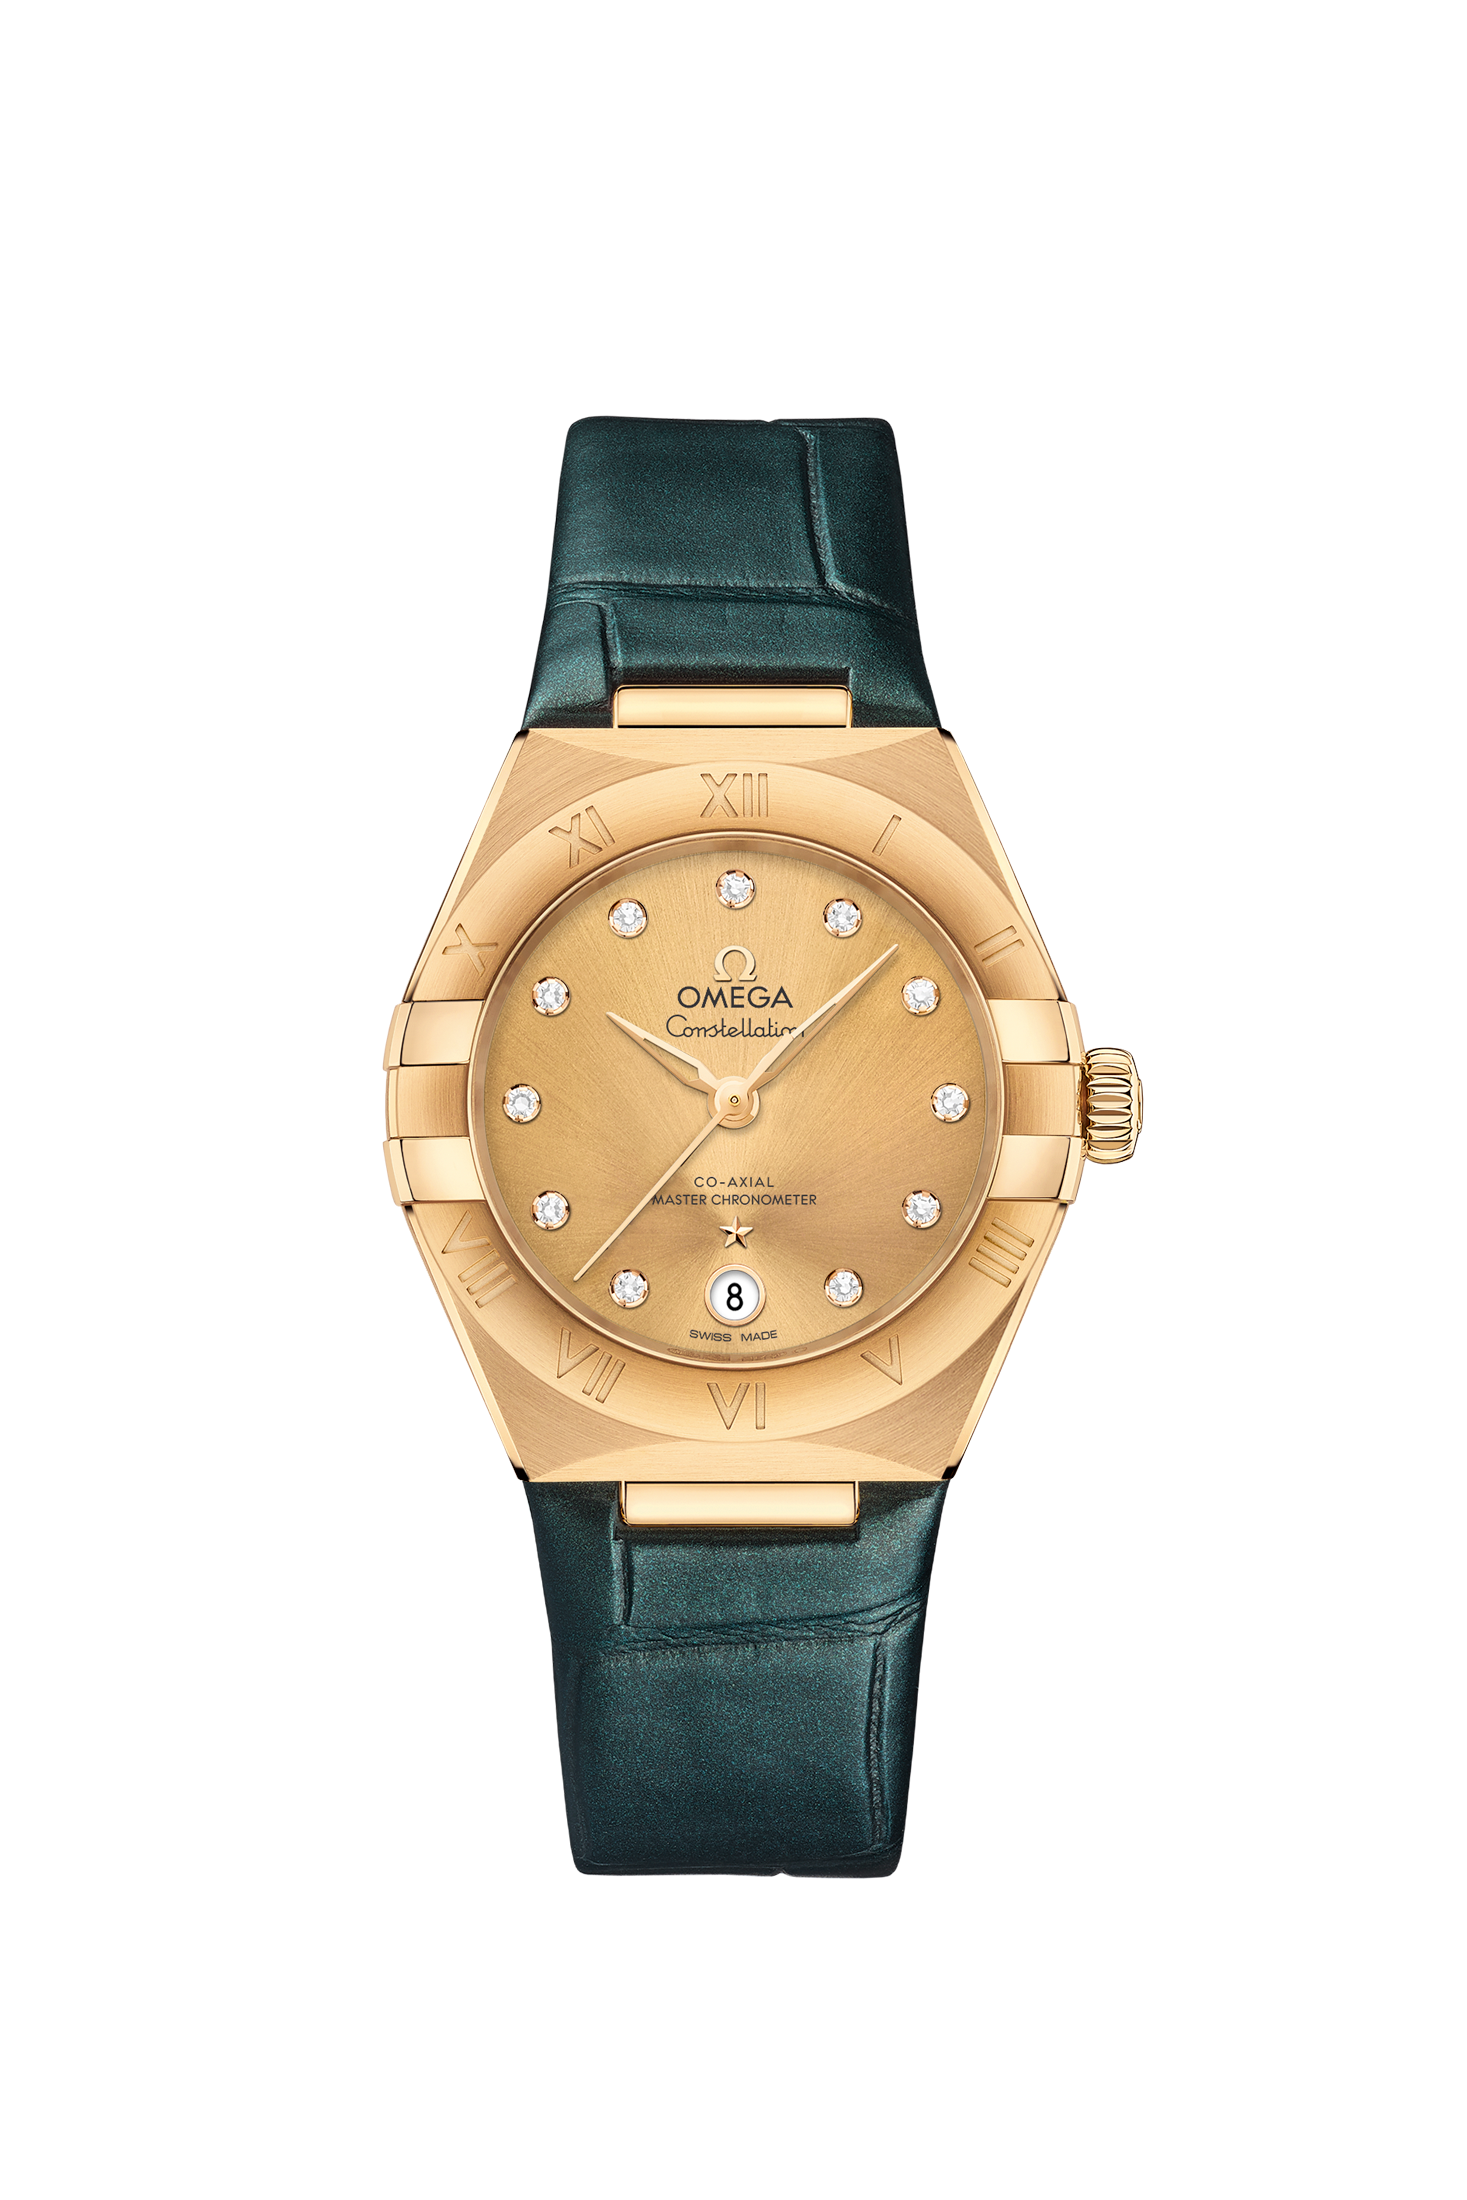 Ladies' watch  OMEGA, Constellation Co Axial Master Chronometer / 29mm, SKU: 131.53.29.20.58.001 | watchphilosophy.co.uk